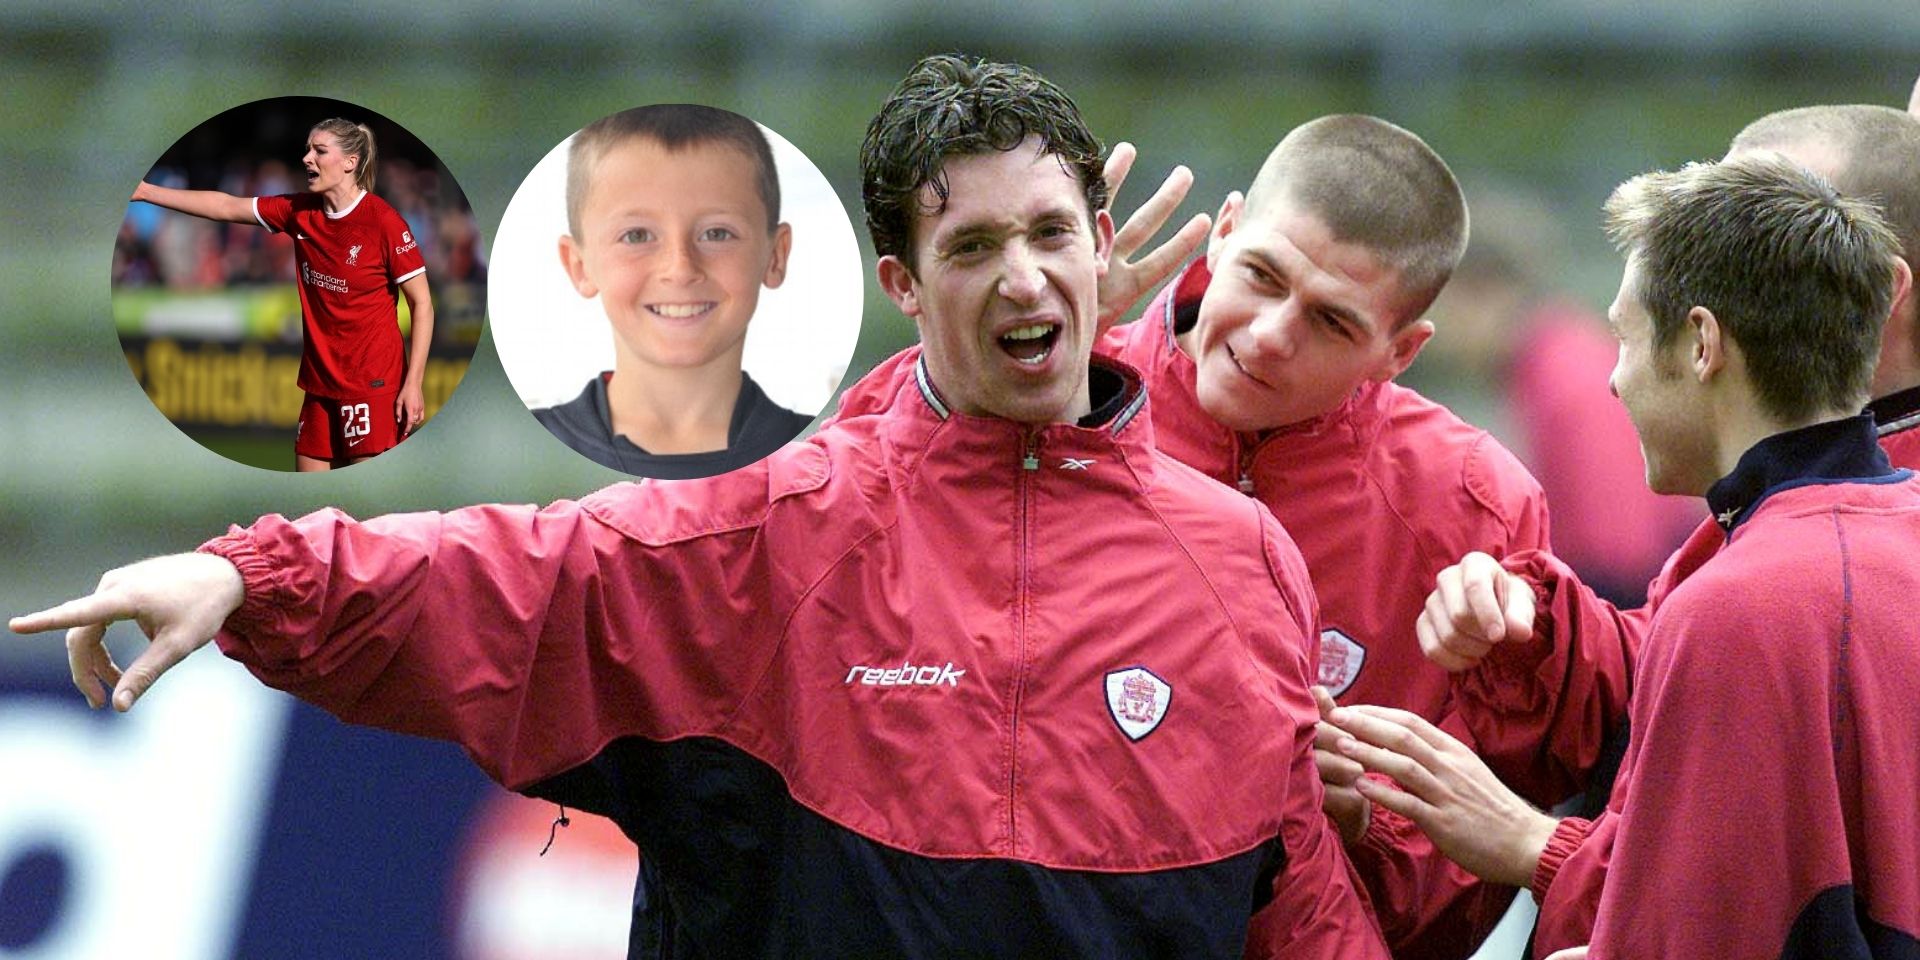 32-y/o joins Gerrard and Fowler with dedicated Liverpool door after breaking club record